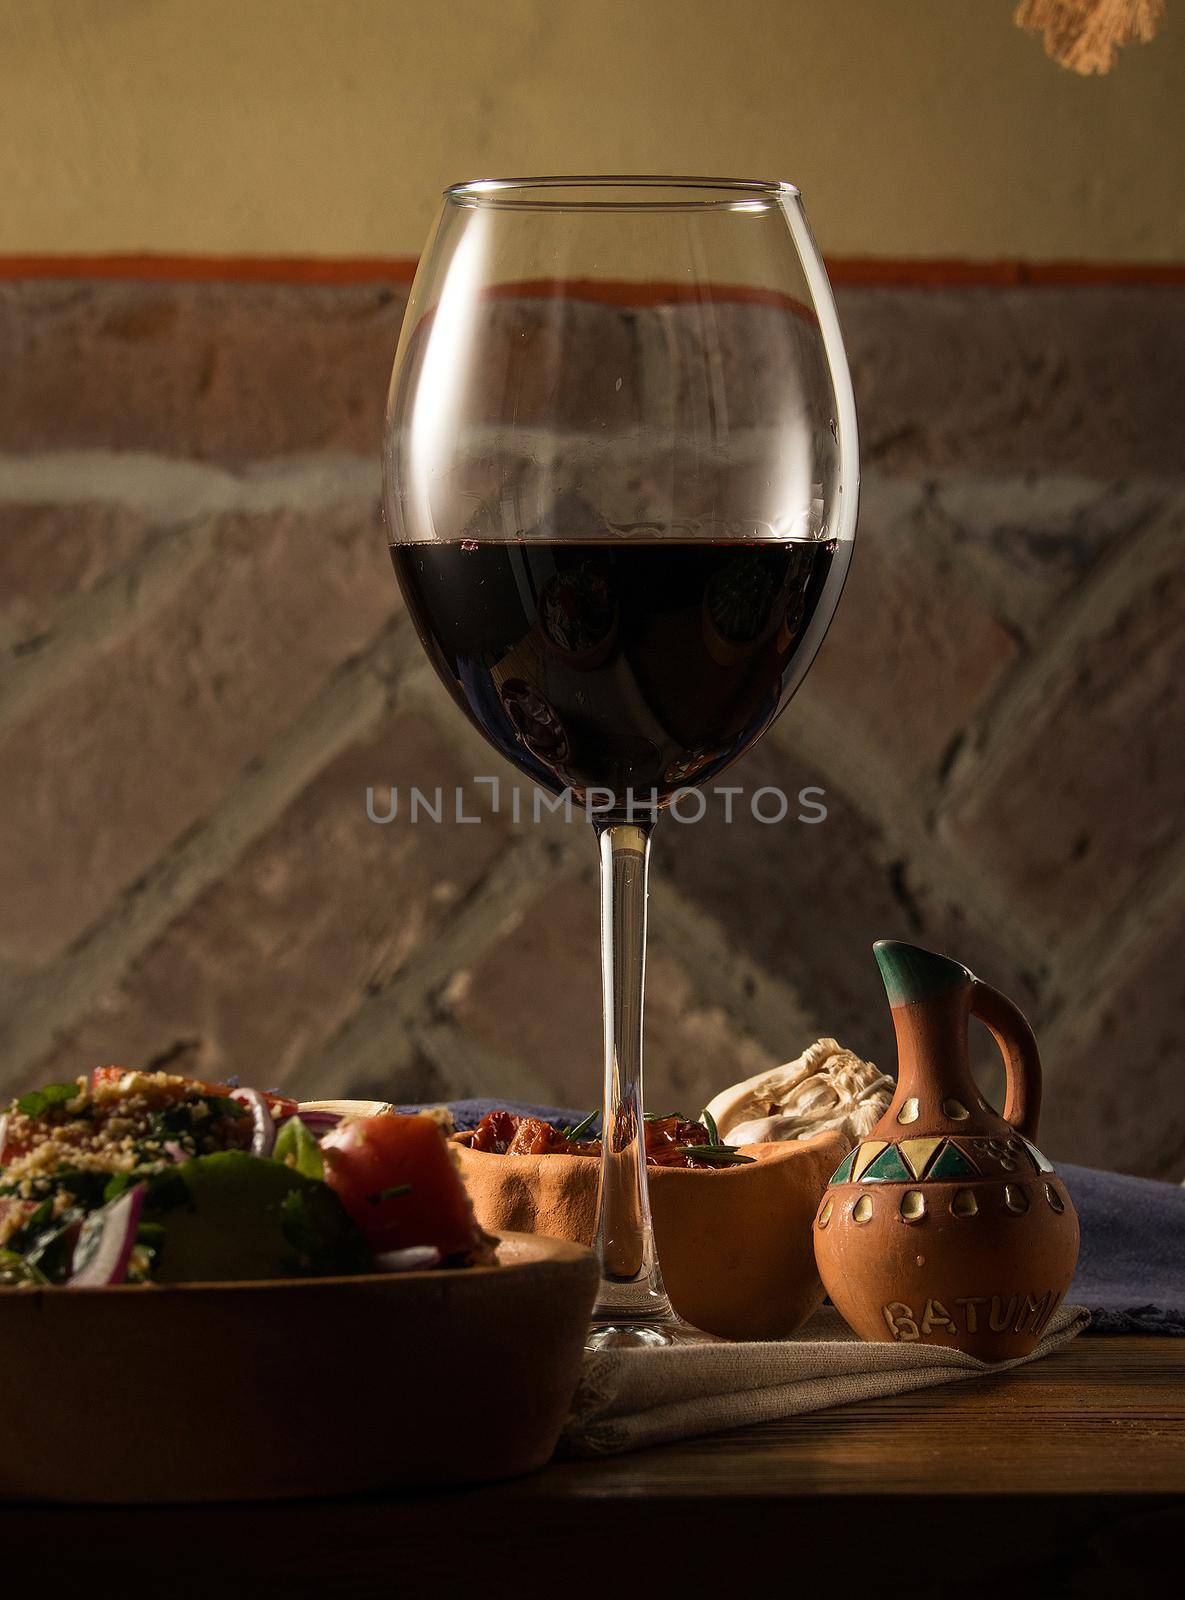 A glass of wine on a table with dishes